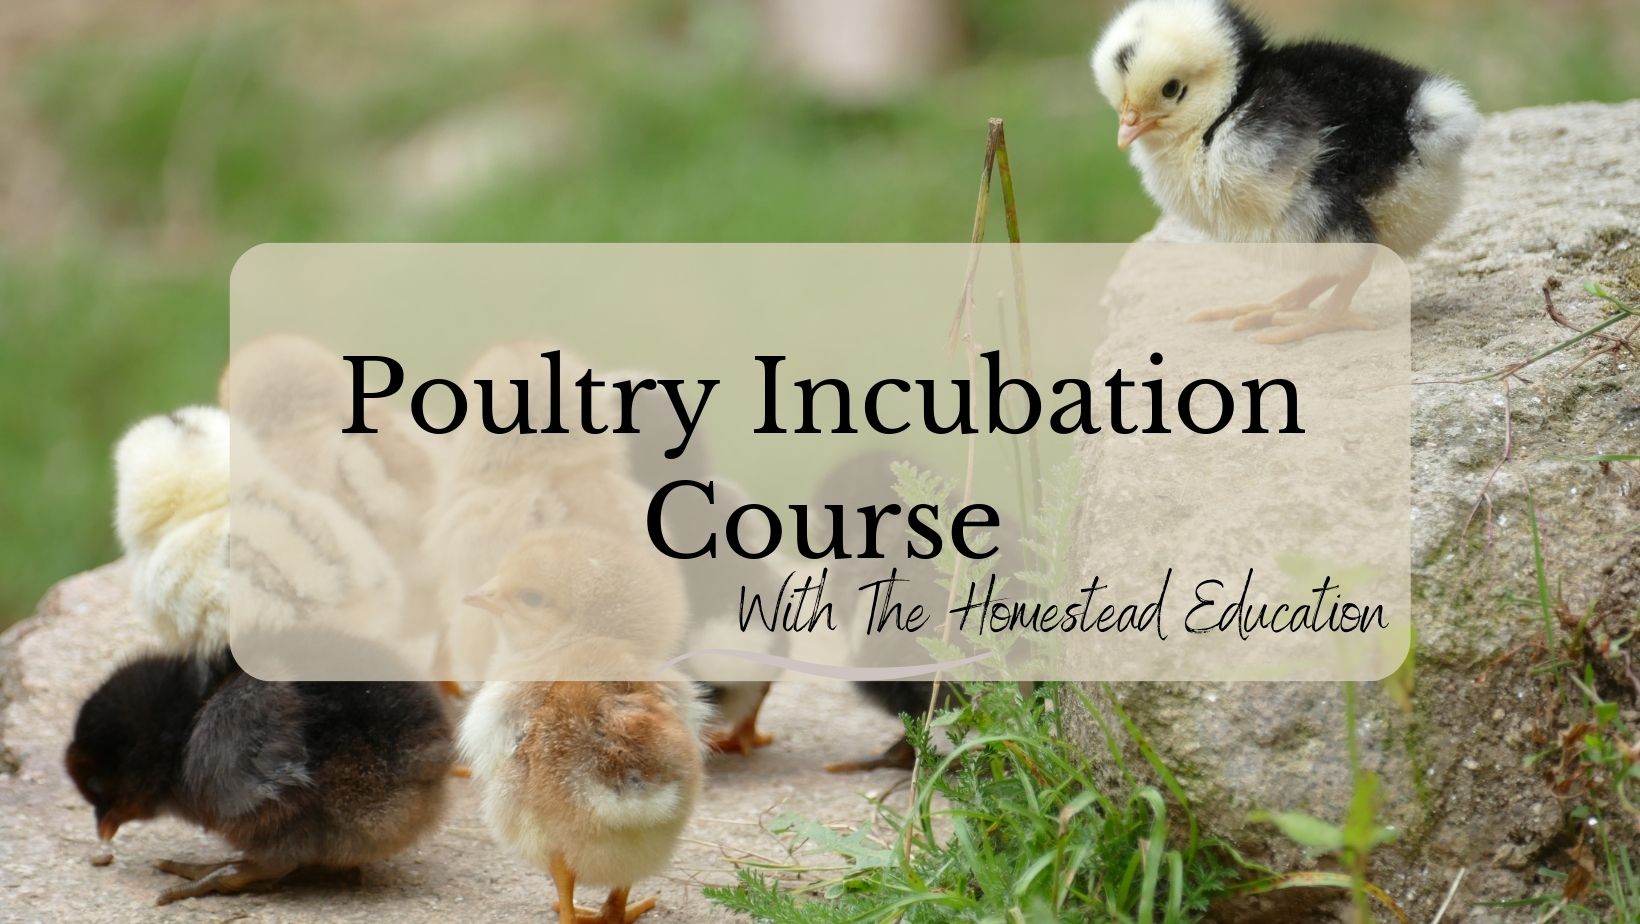 Poultry Egg Incubation For Profit on Your Homestead